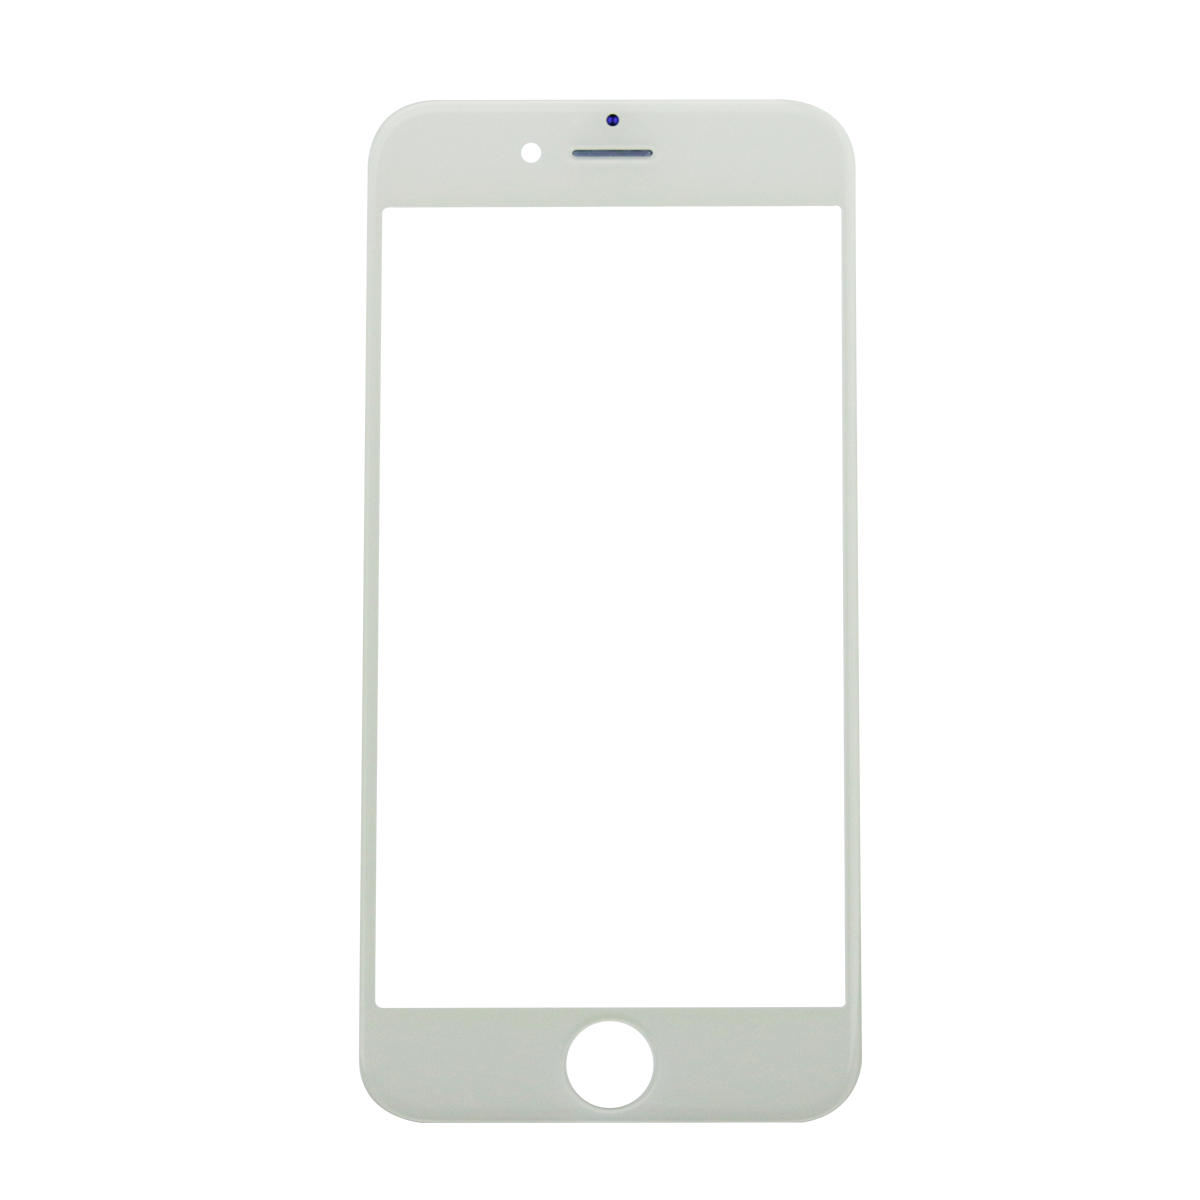 IPhone PNG Image with Transparent Background